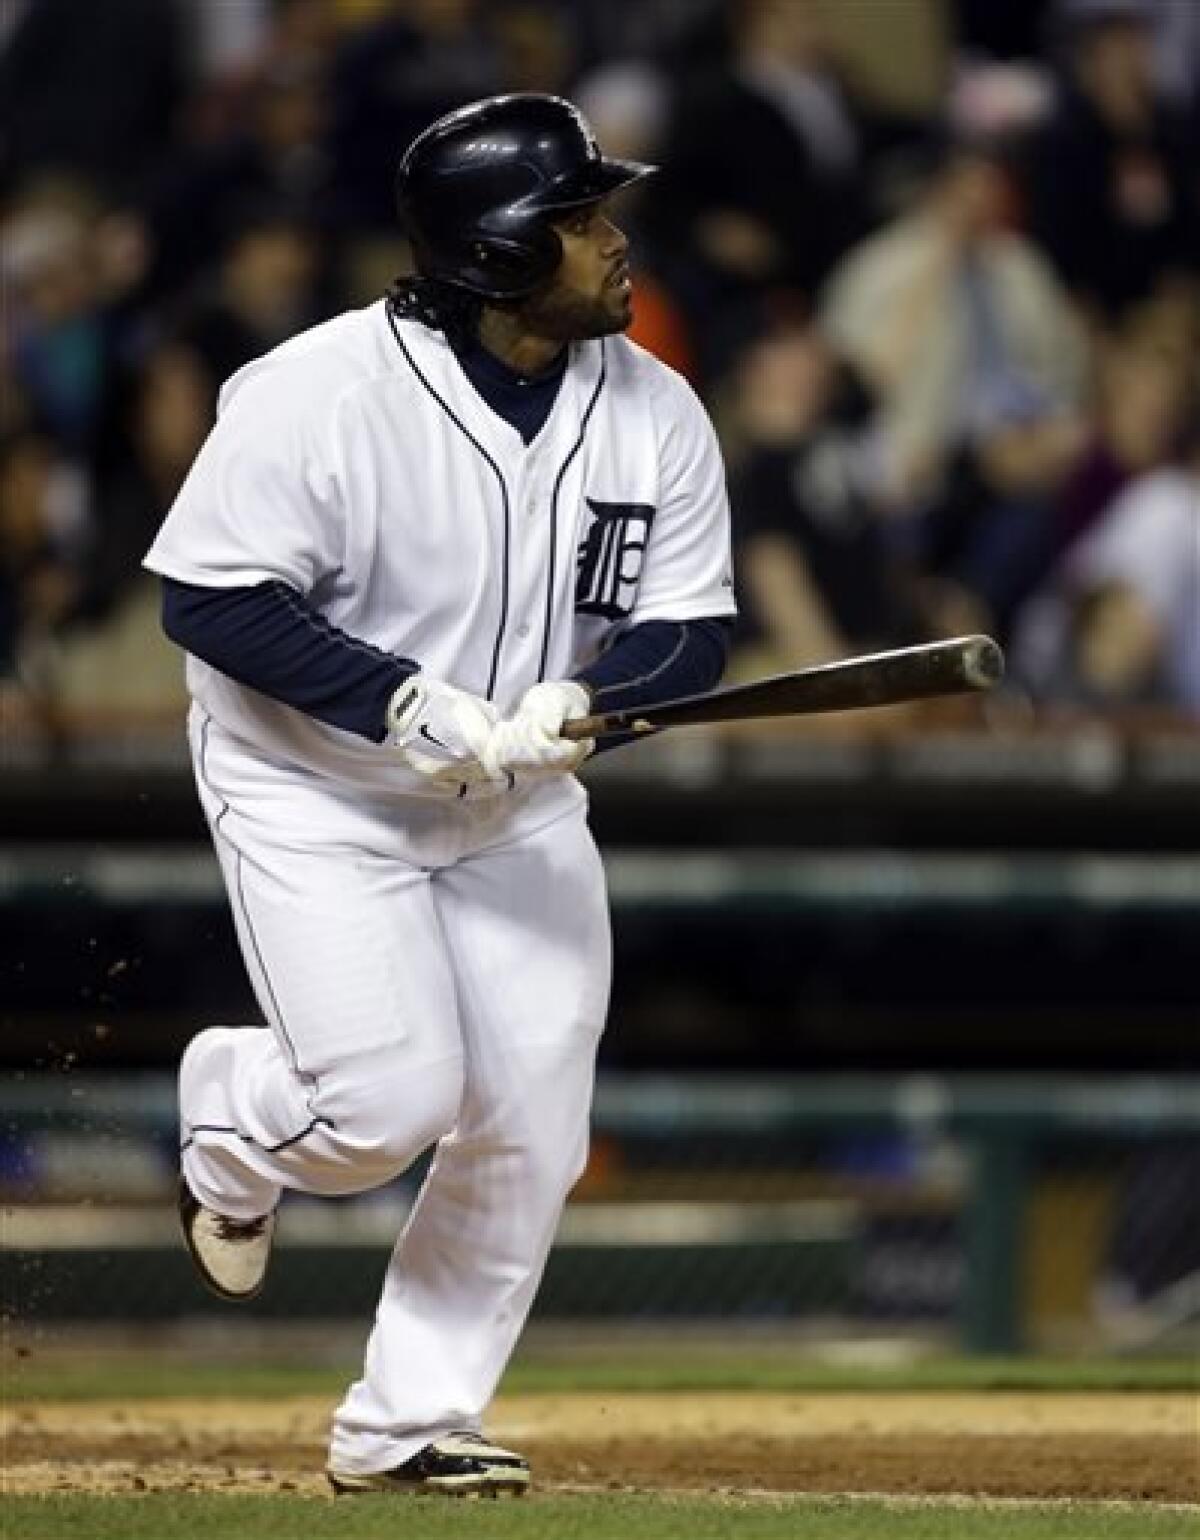 Fielder's homer lifts Tigers over Twins 4-3 - The San Diego Union-Tribune